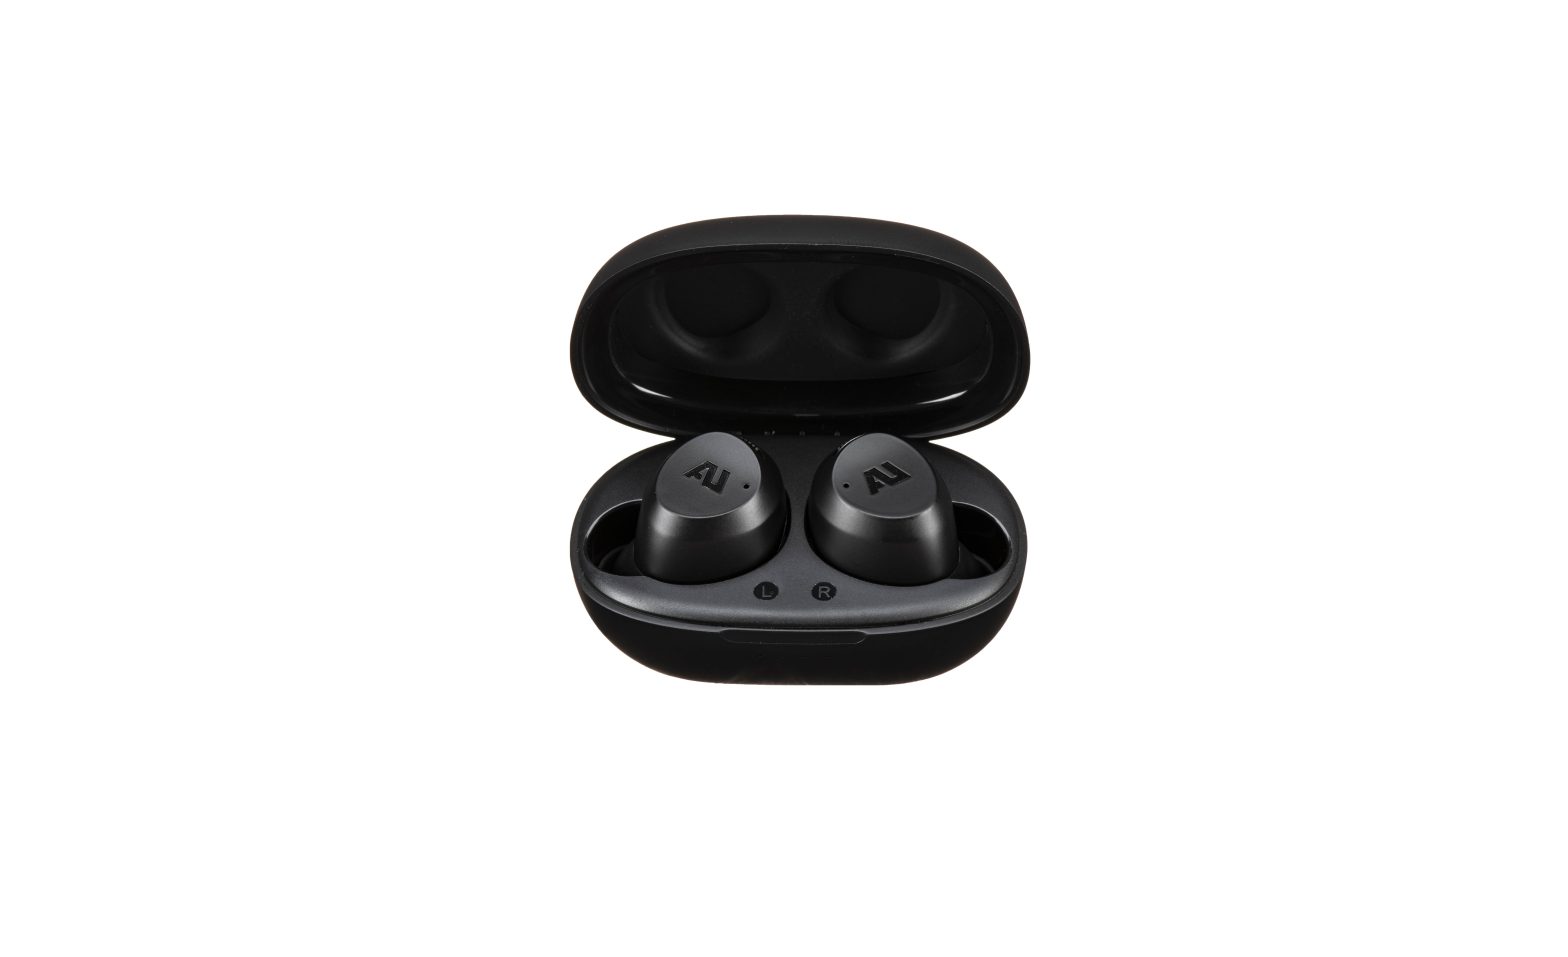 AU STREAM AUSHB101 Hybrid Active Noise Canceling Earbuds User Guide